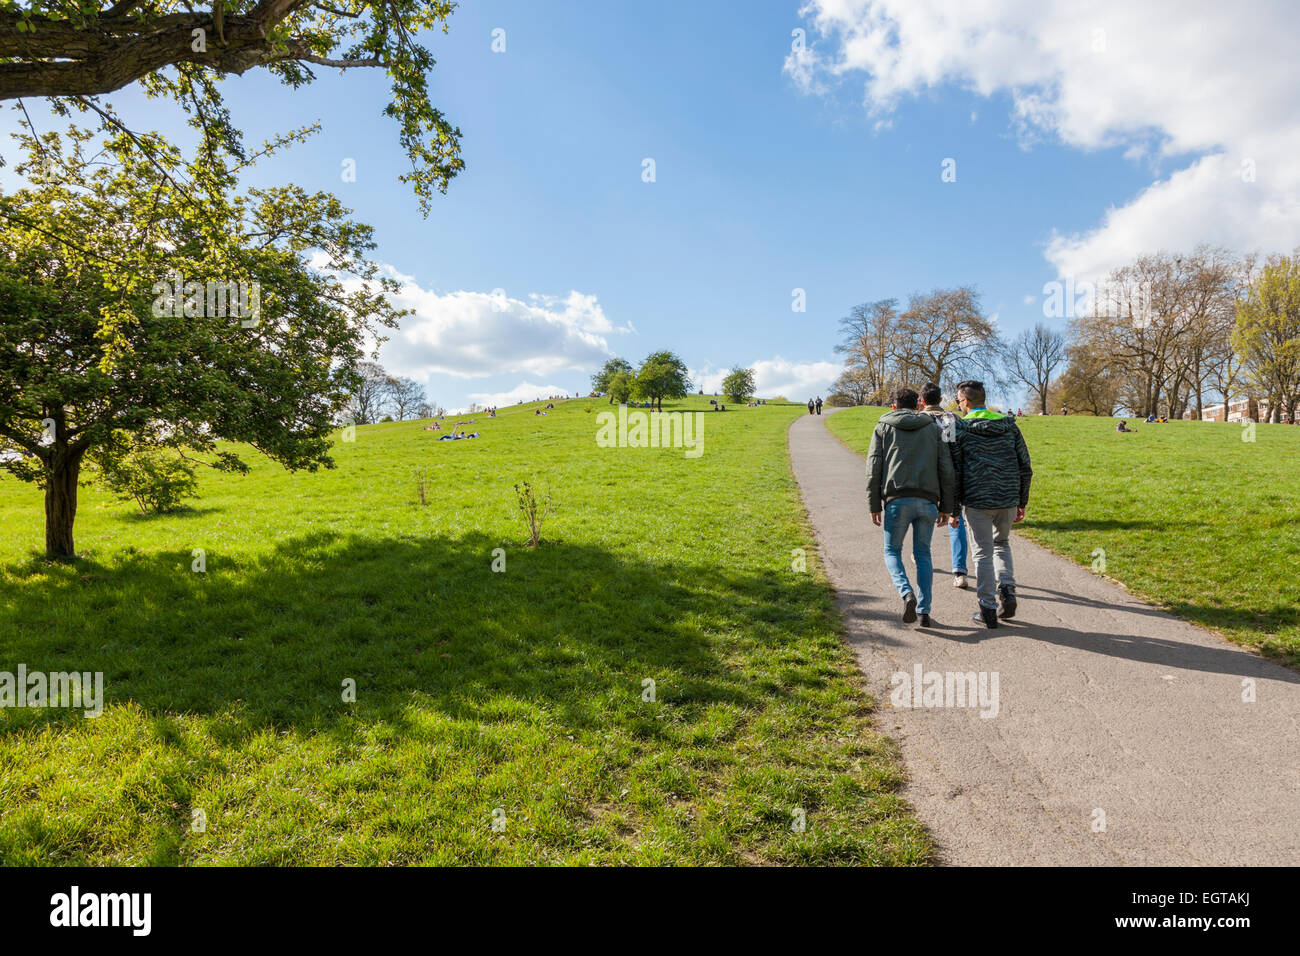 People walking away along a path in a park. Primrose Hill, London, England, UK Stock Photo